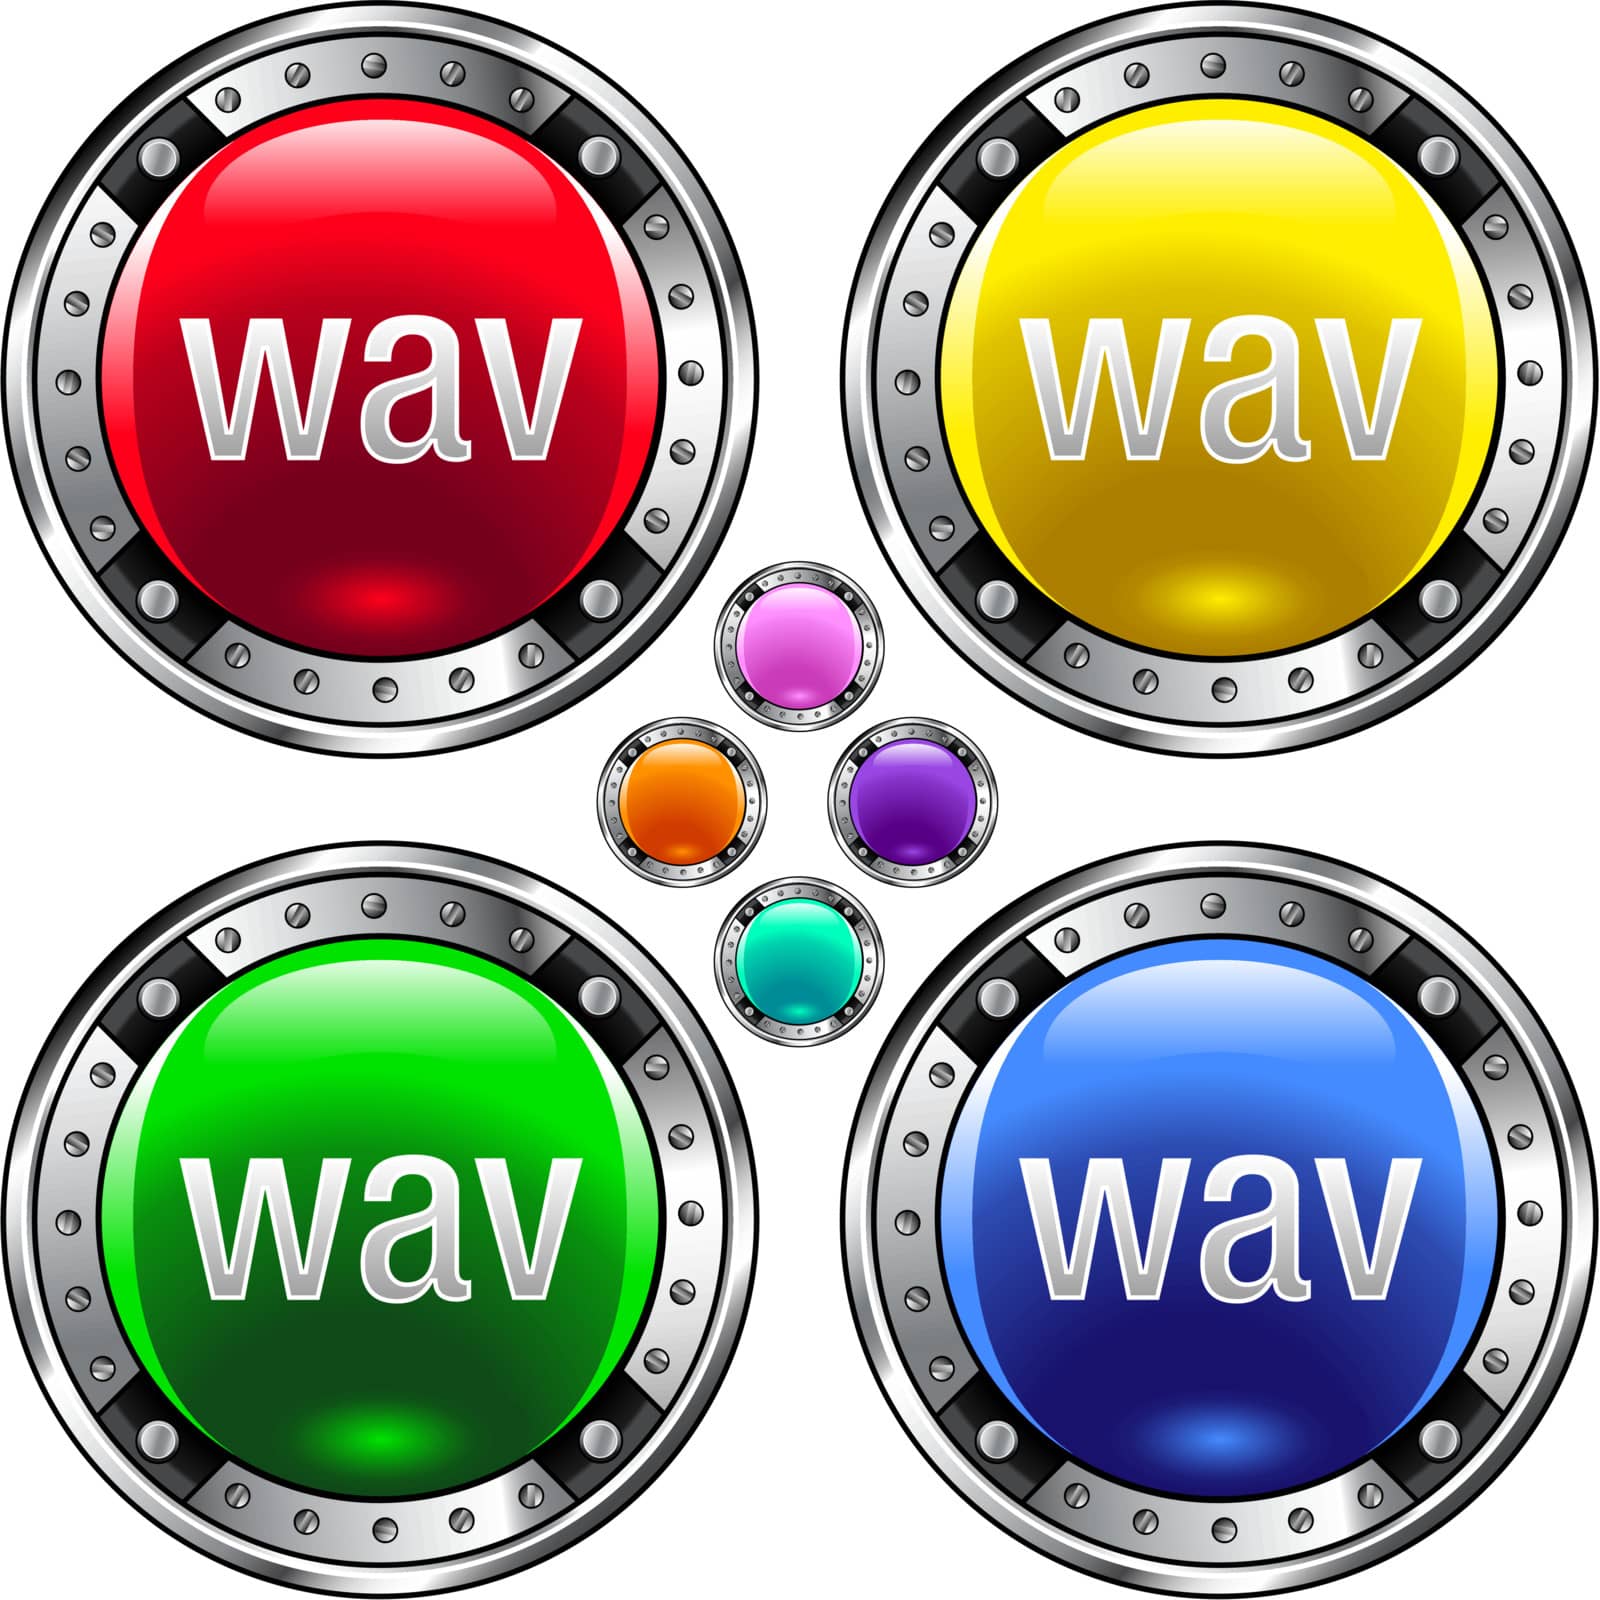 WAV file extension icon on round colorful vector buttons suitable for use on websites, in print materials or in advertisements. Set includes red, yellow, green, and blue versions.